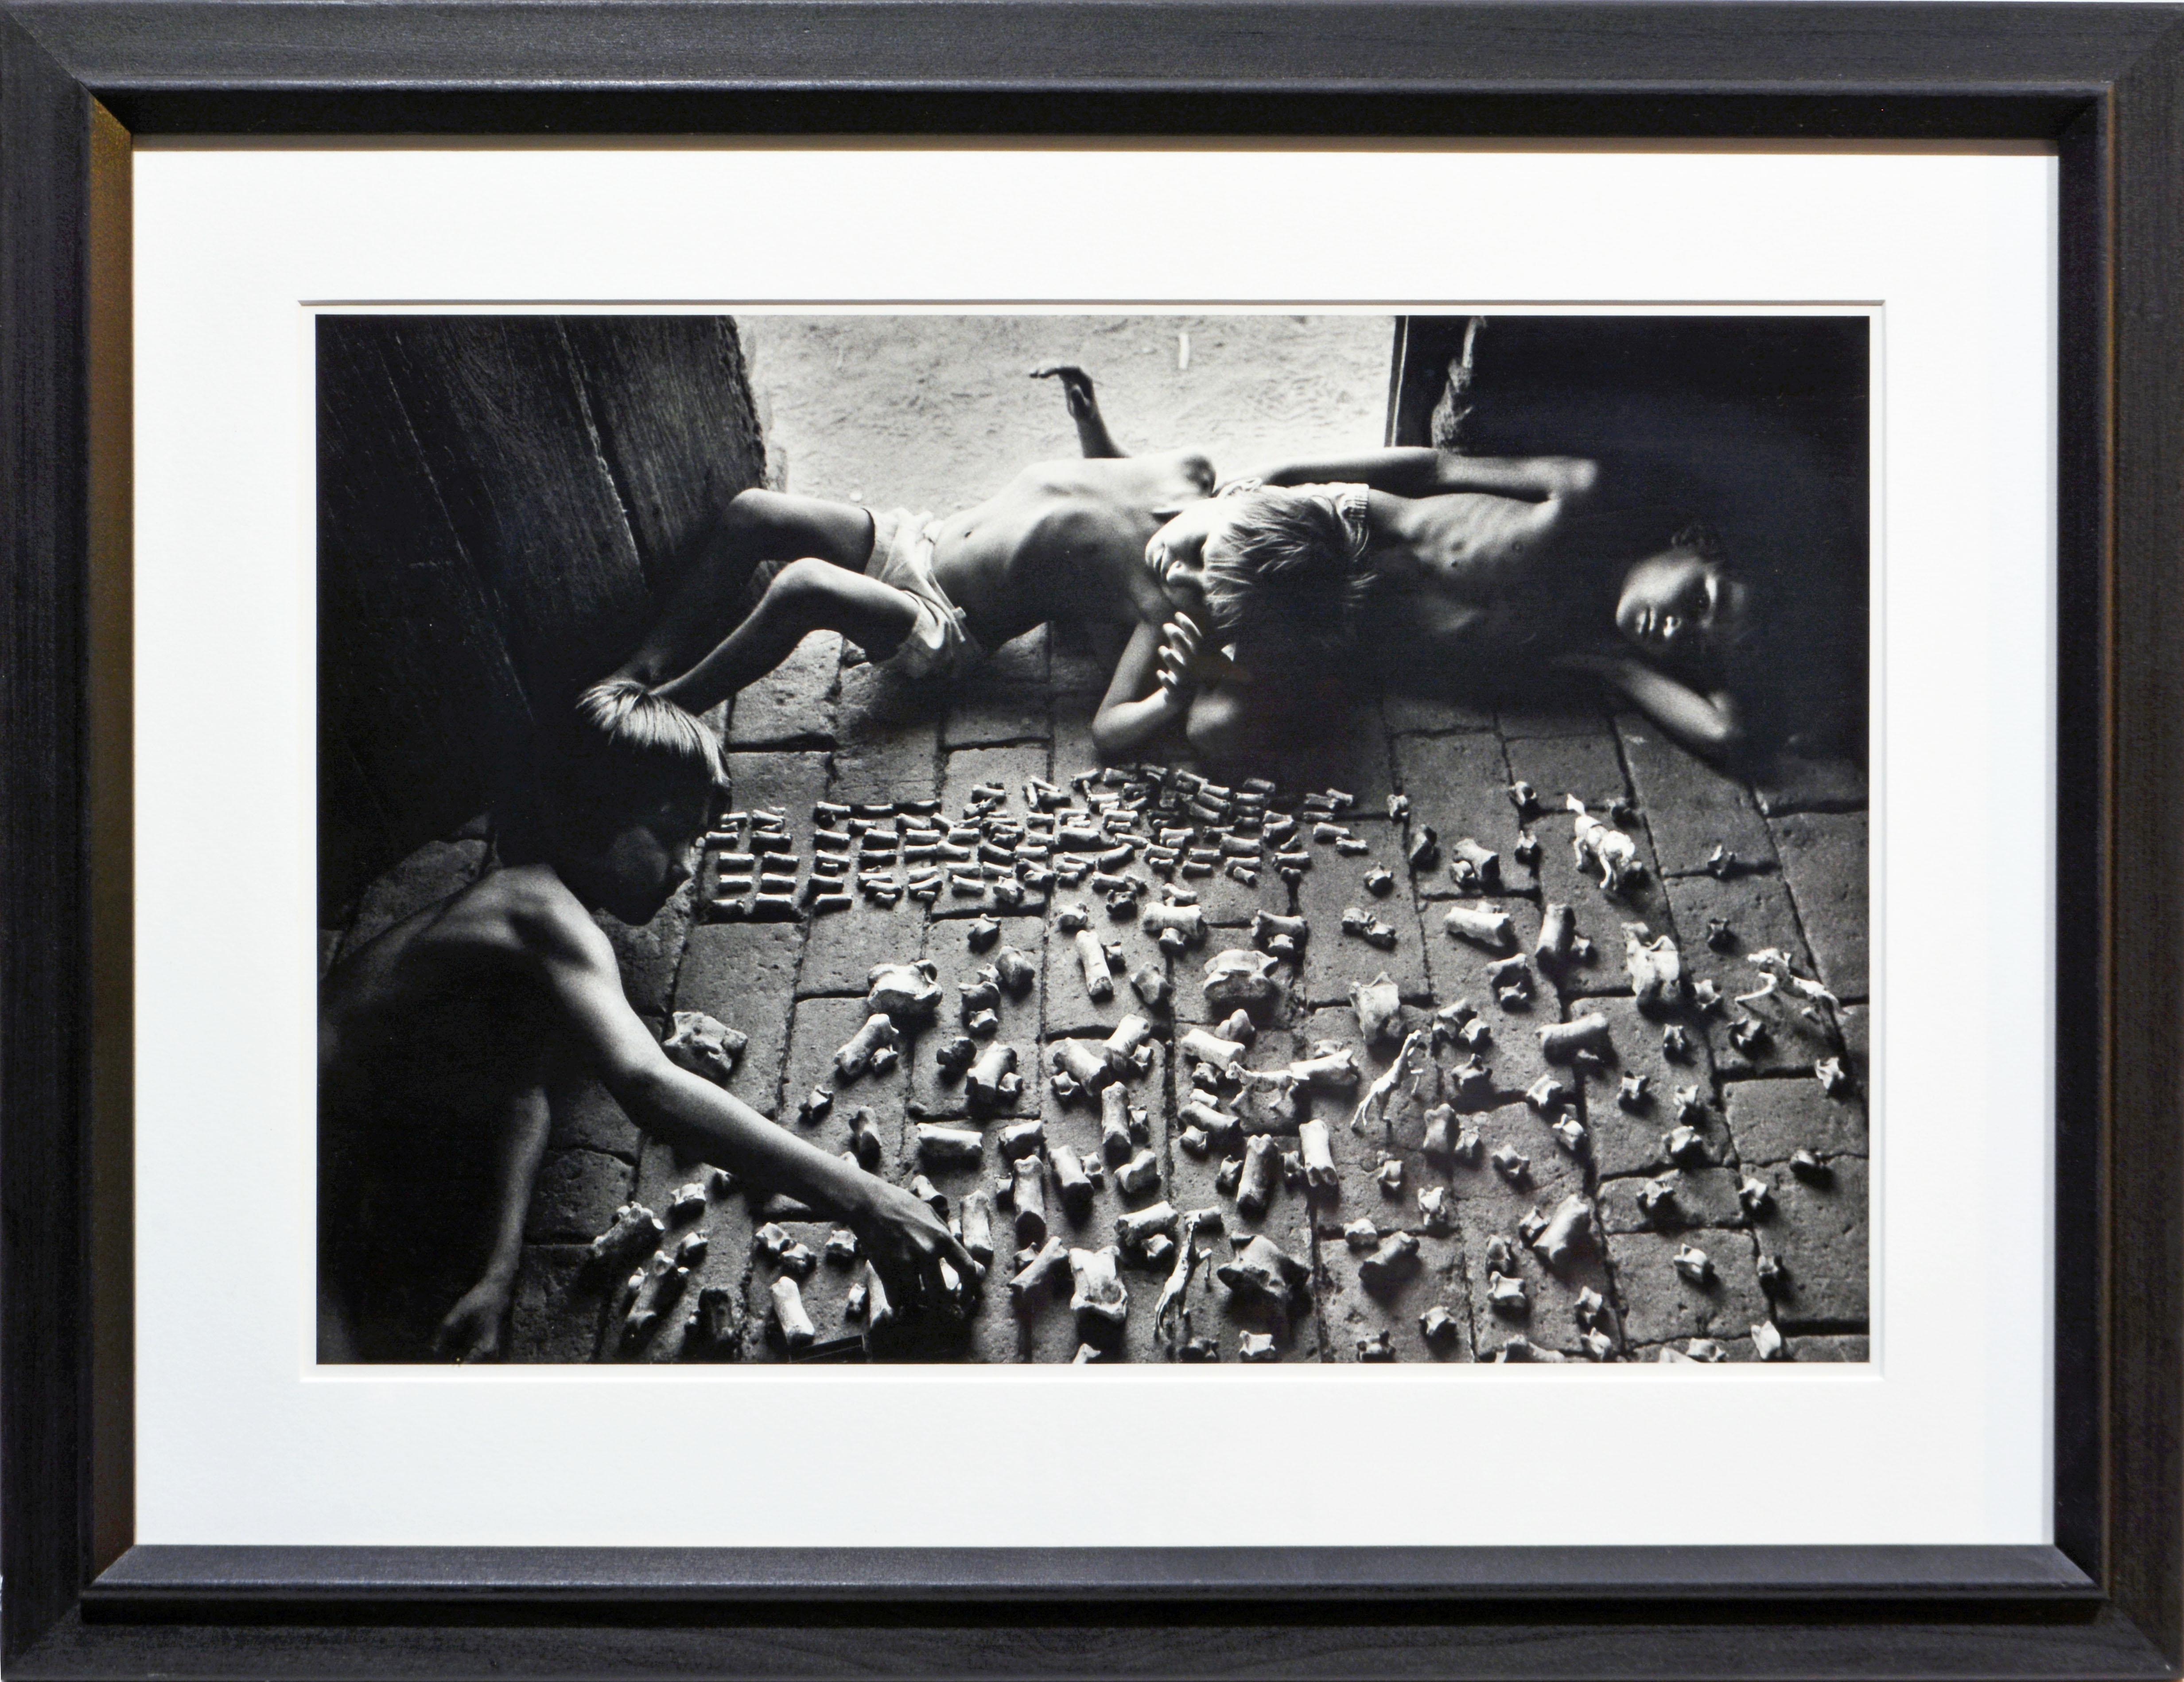 Sebastião Salgado (Brazil, born 1944)
'Boys at Play' from the Other Americas series.
Gelatin silver print, image: 12.75 x 17.5 in / 30 x 44 cm, full margins. Frame: 18.75 x 25 in / 33 x 48 cm.
Signed, blind stamped, dated, numbered and inscribed